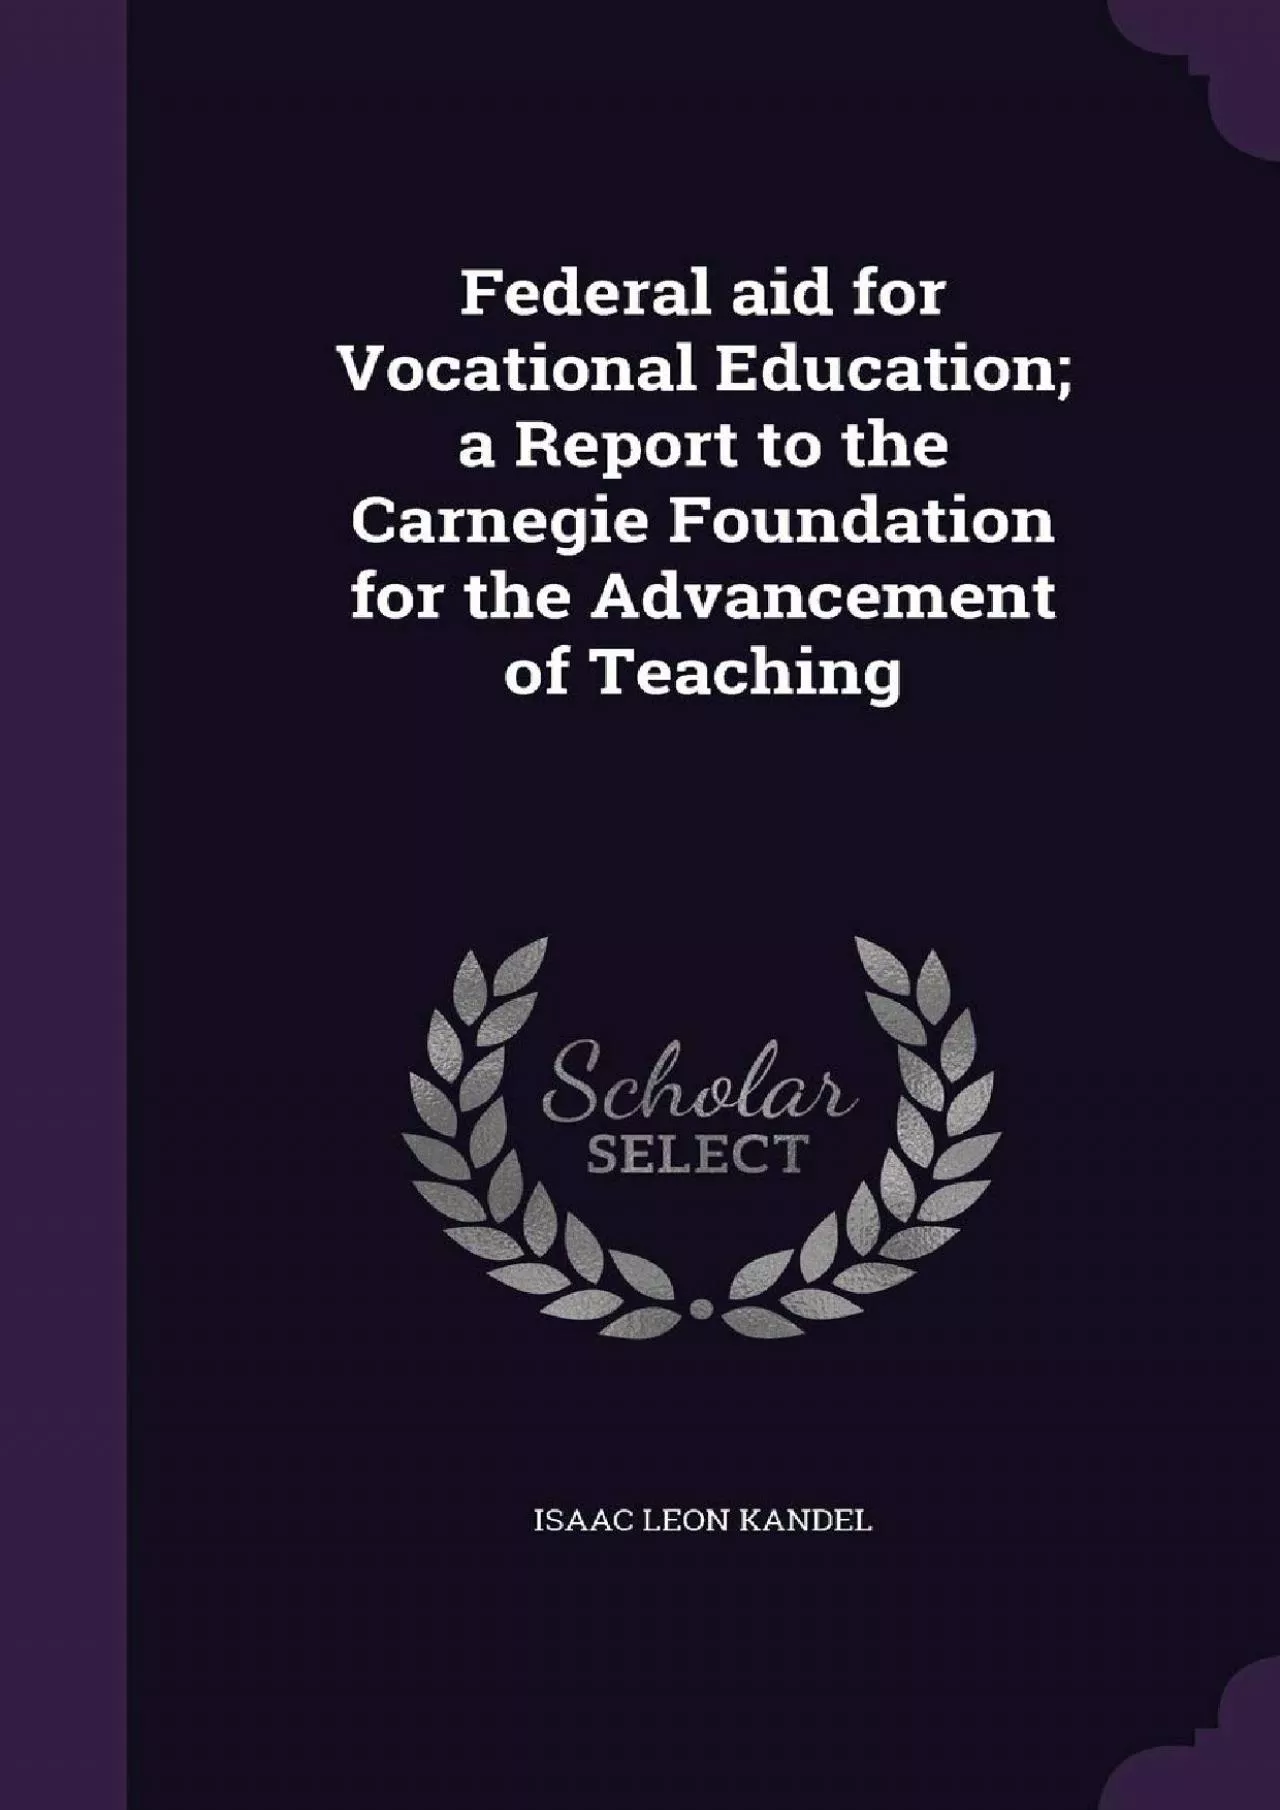 [EBOOK] Federal aid for Vocational Education a Report to the Carnegie Foundation for the